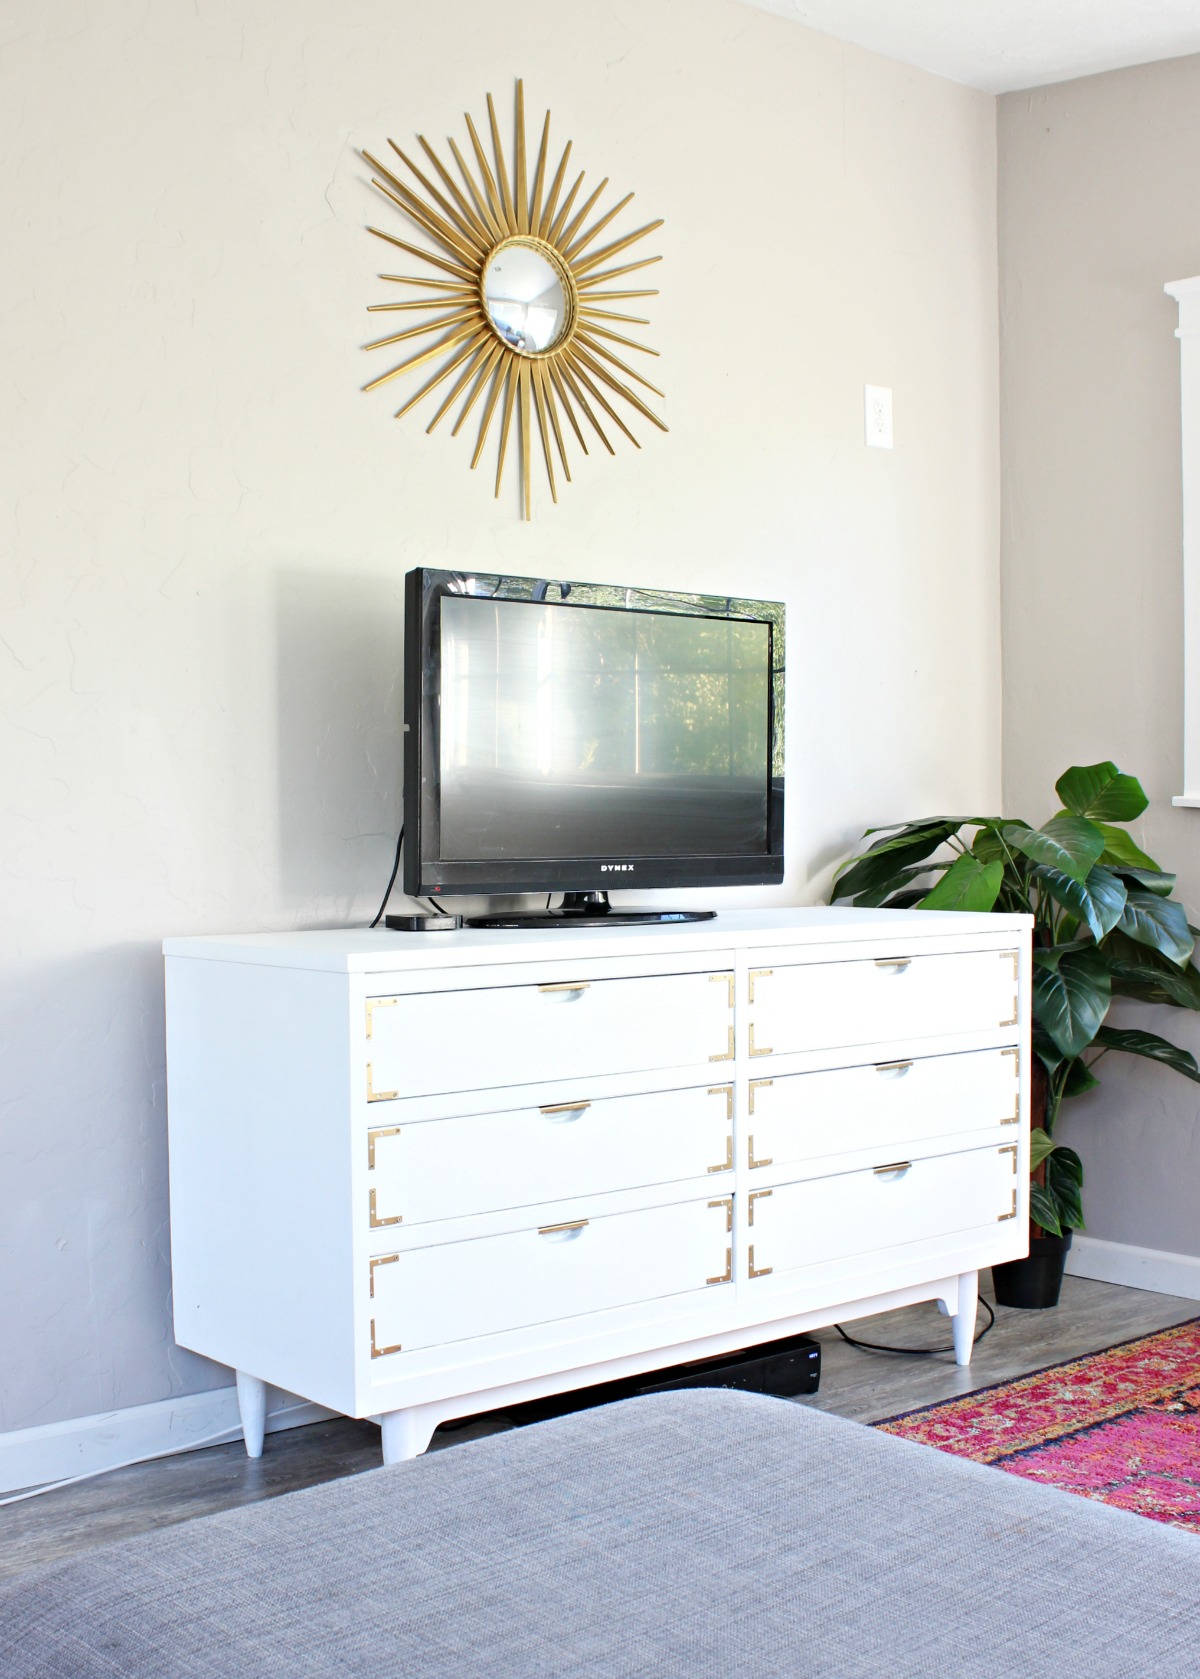 How To Paint A Dresser Inside The House Classy Clutter